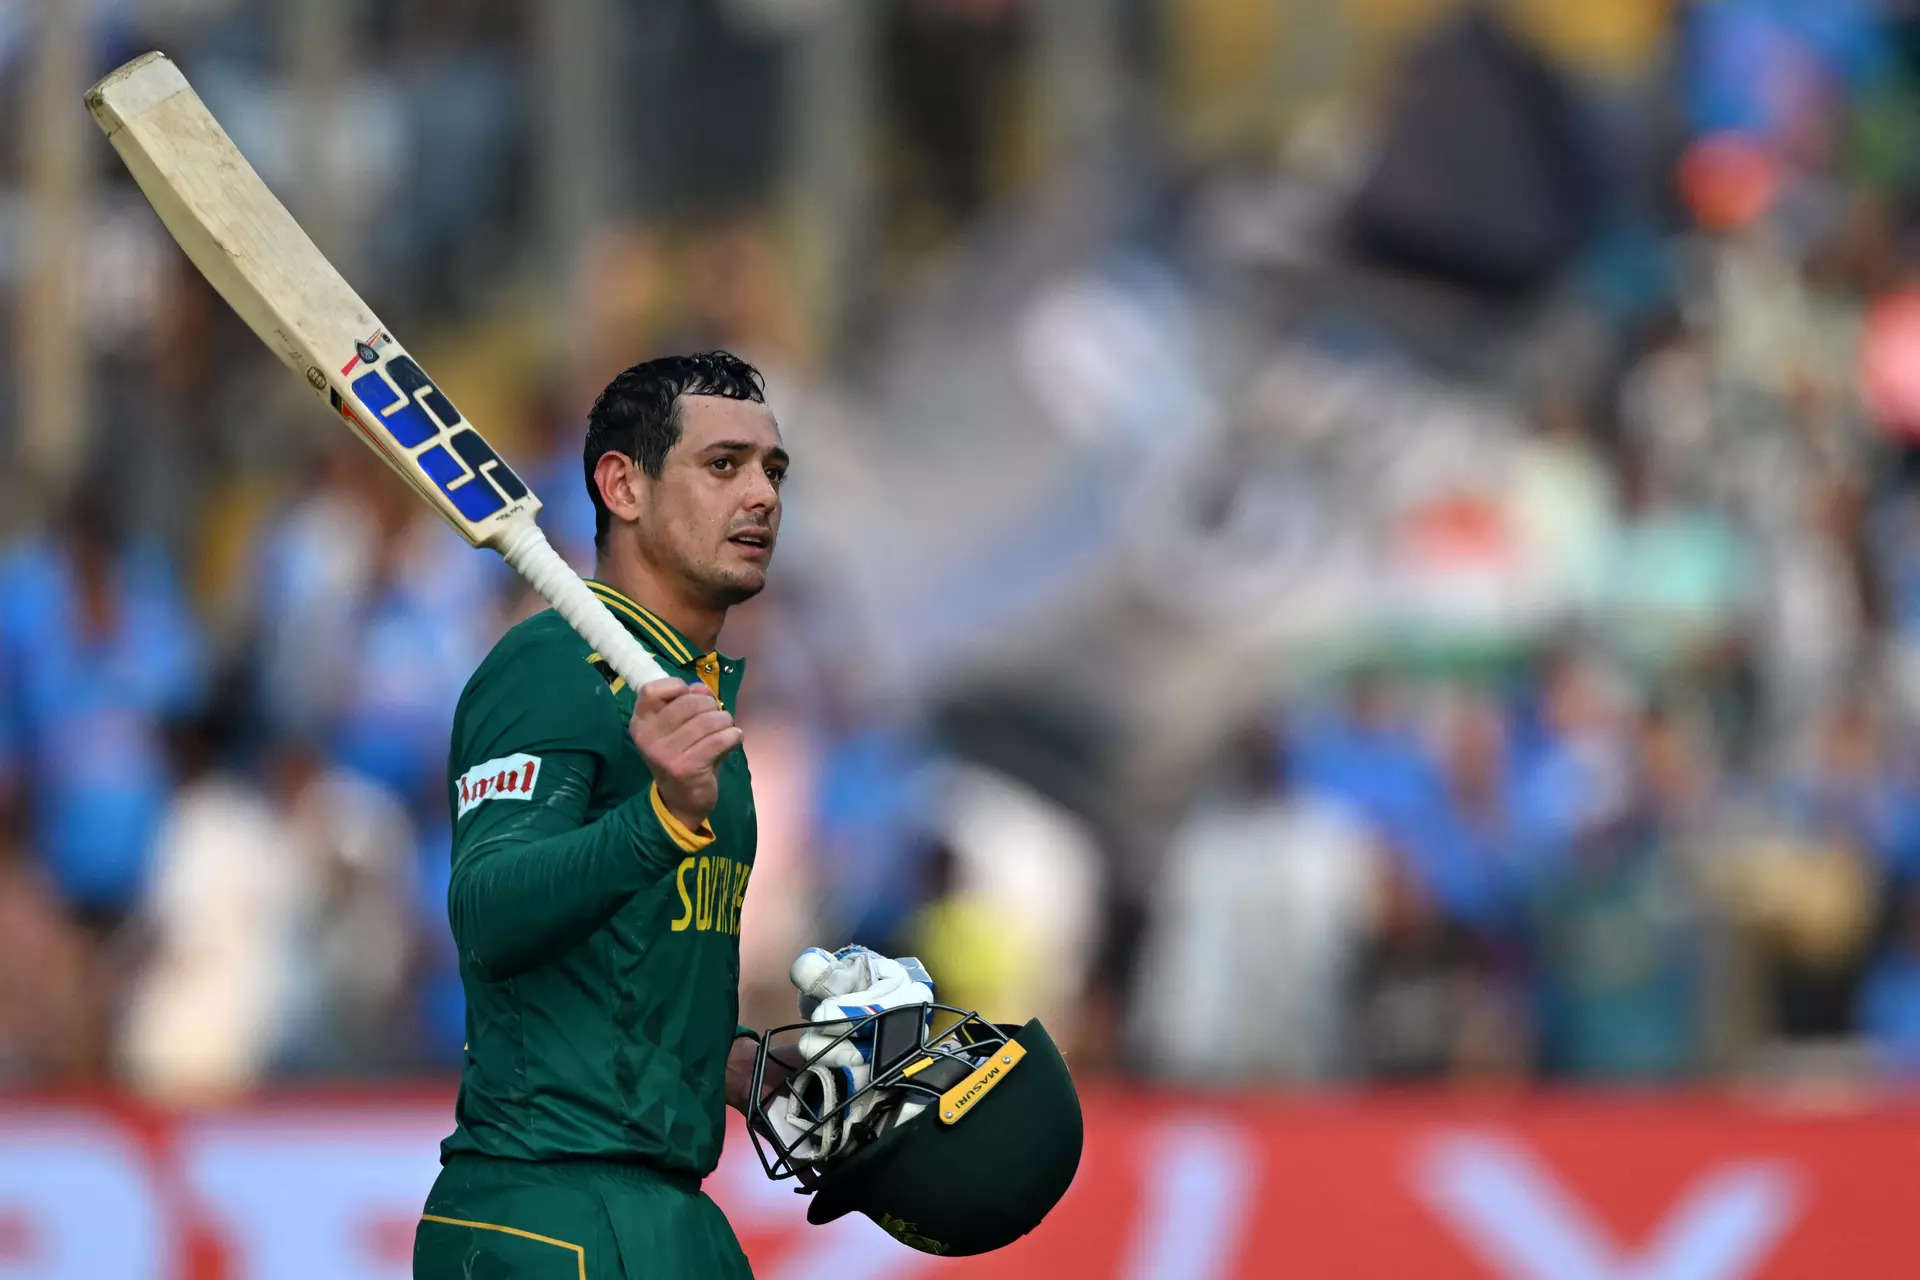 De Kock's impact extends beyond runs for table-topping South Africa